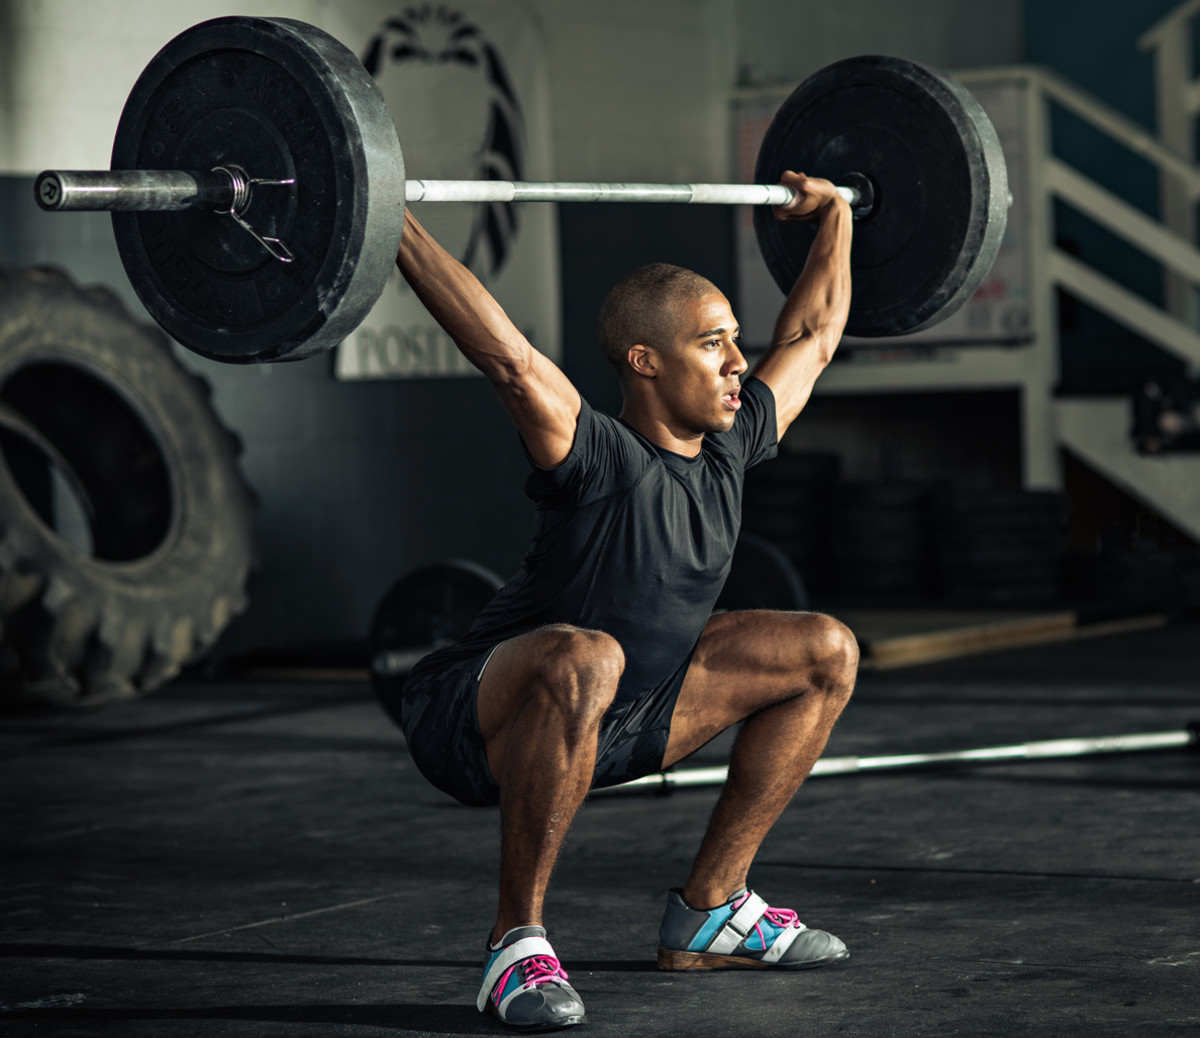 5 Benefits of Lifting Light Weights - Weight-Lifting for Weight Loss